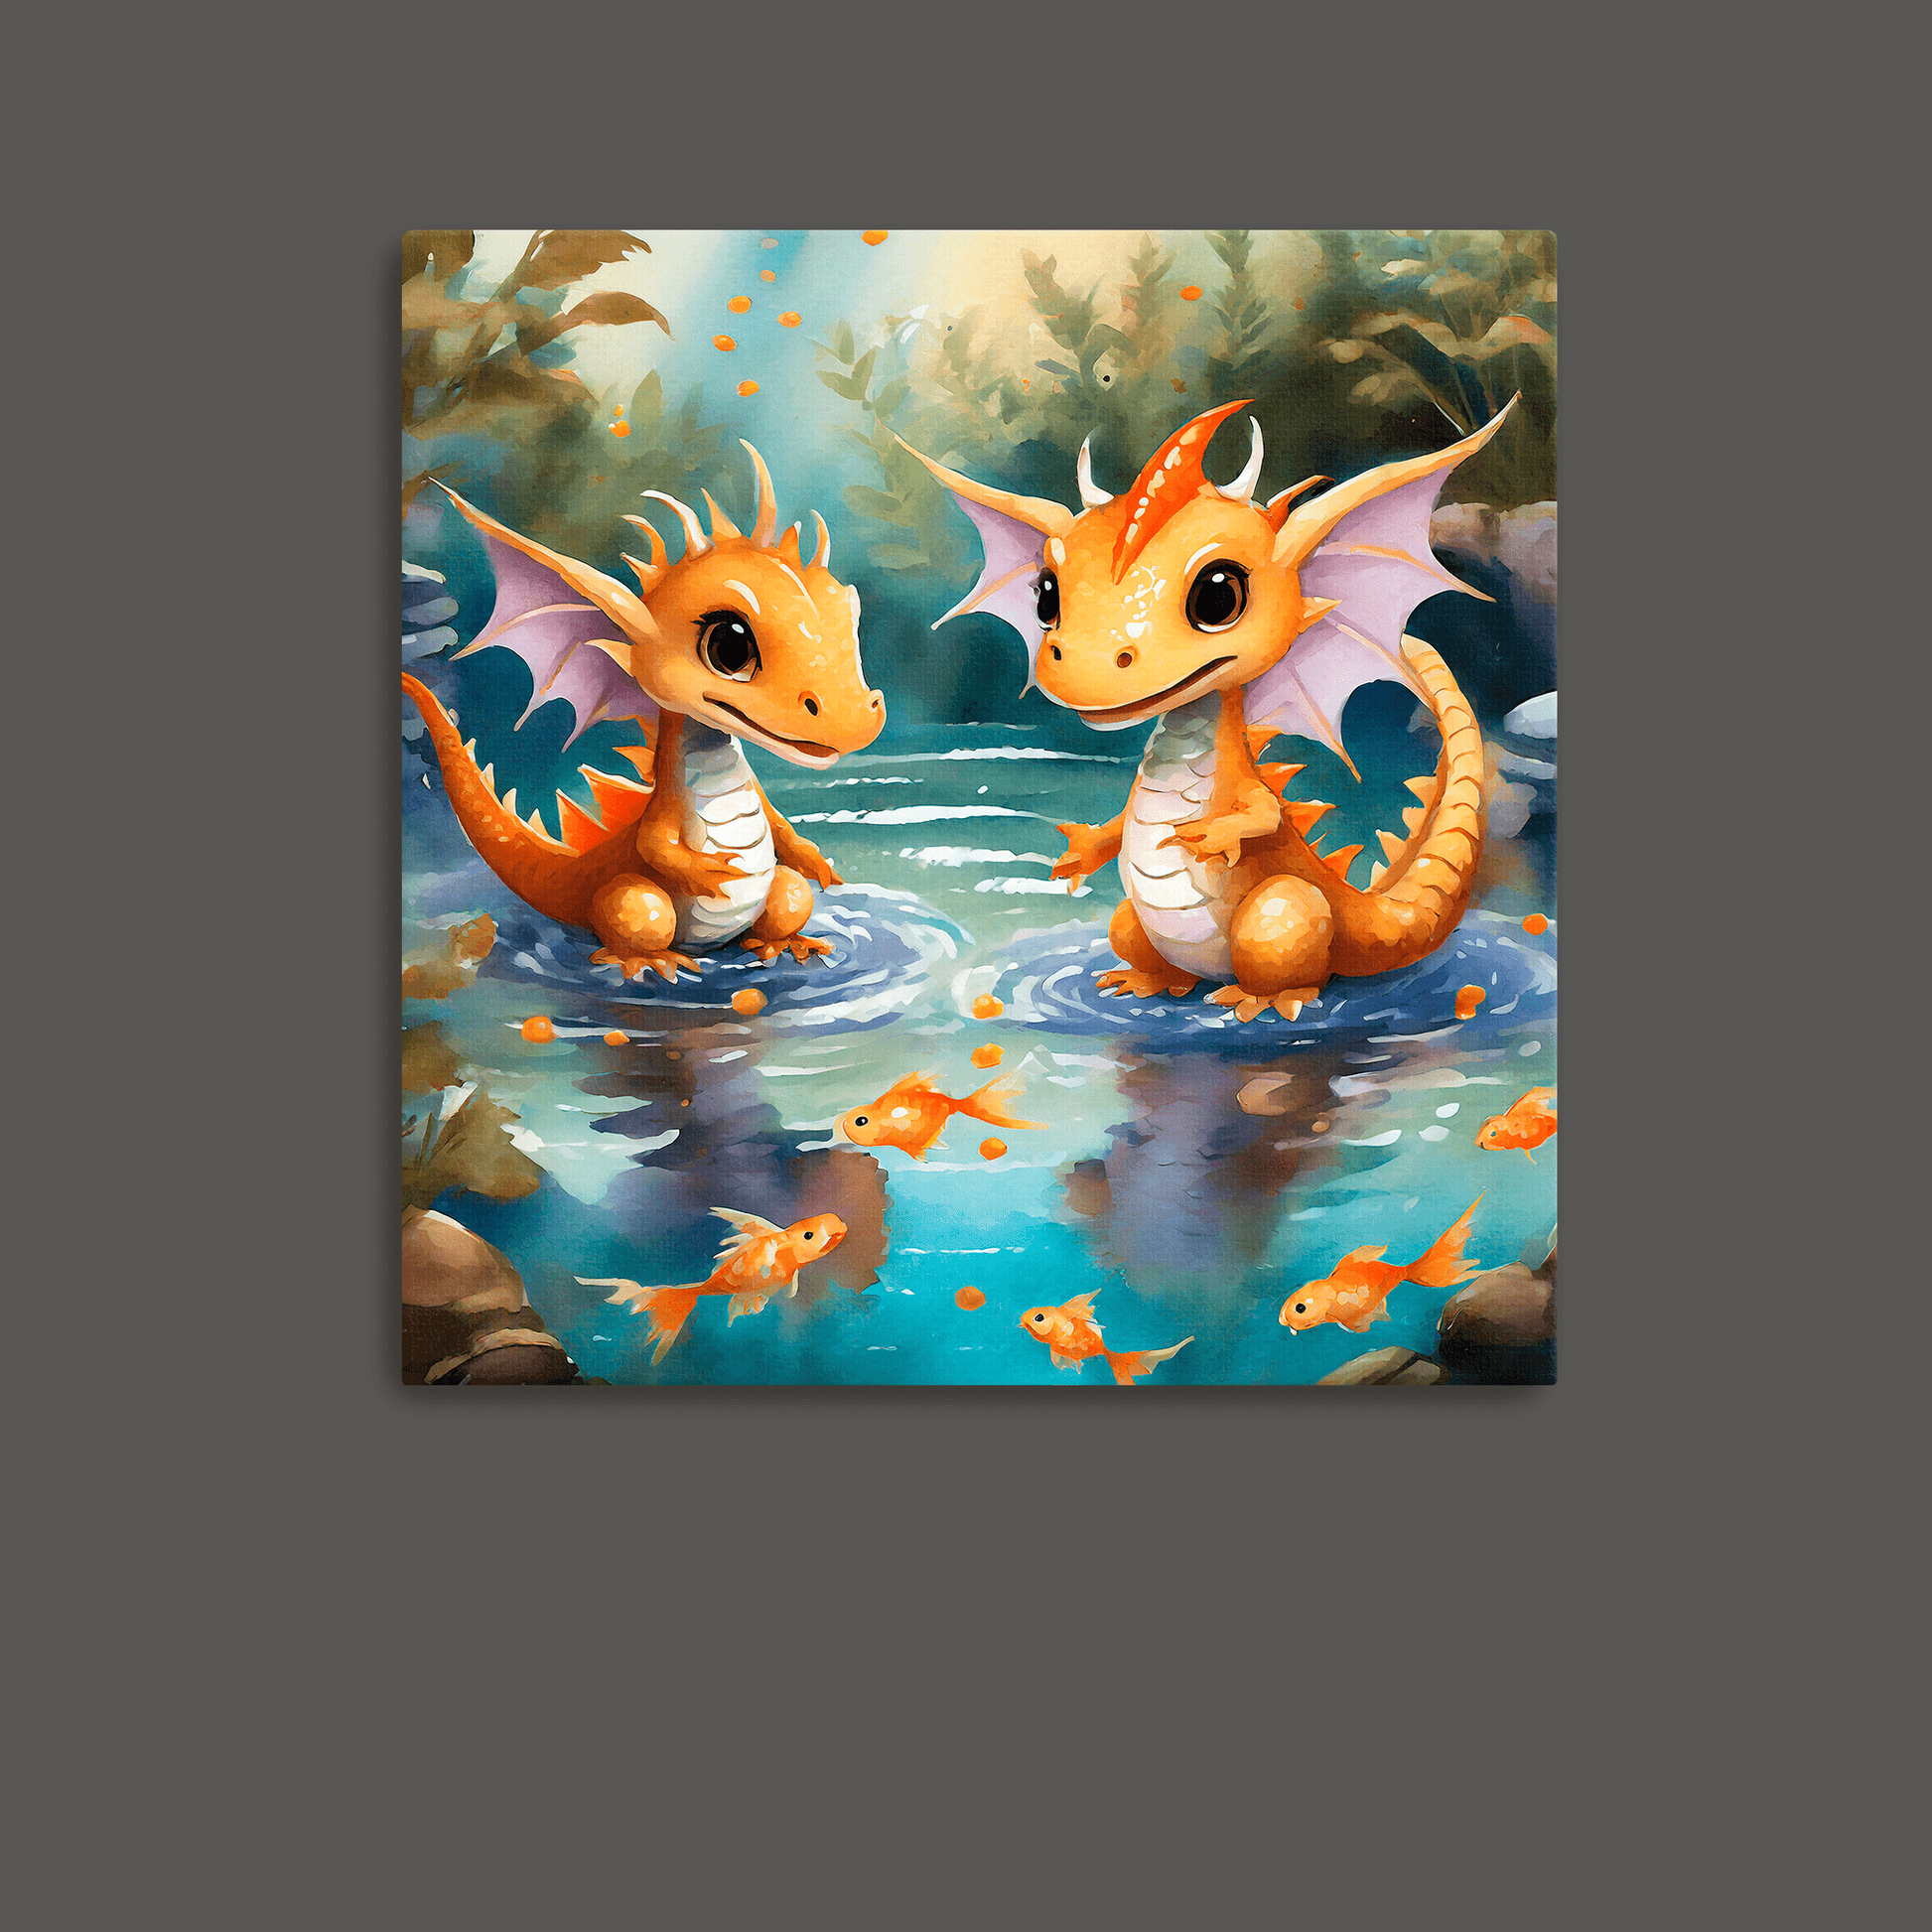 Baby Dragons Play with Goldfish - Canvas Wrap - Premium Canvas Wrap